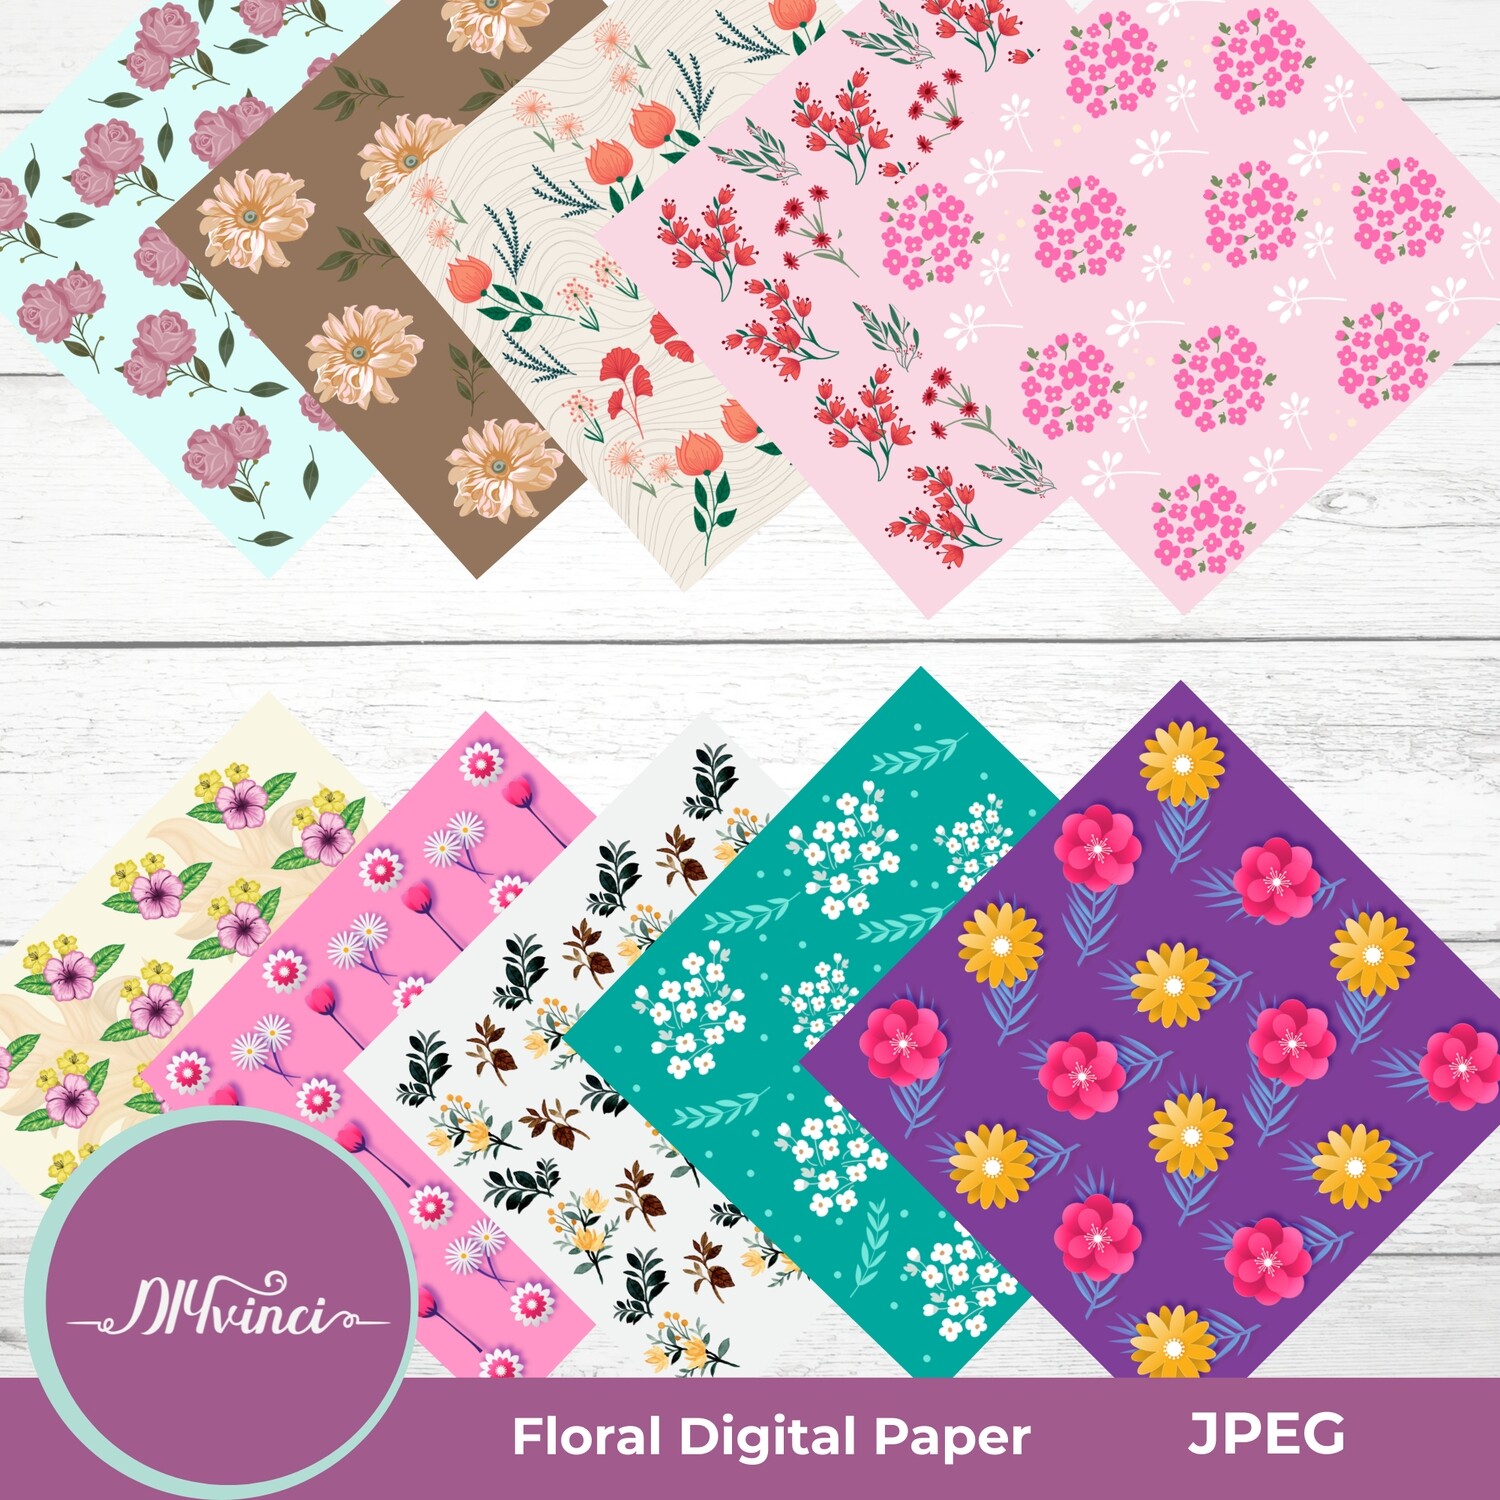 Seamless Floral Digital Paper Pack - 10 PNG - Personal & Commercial Use